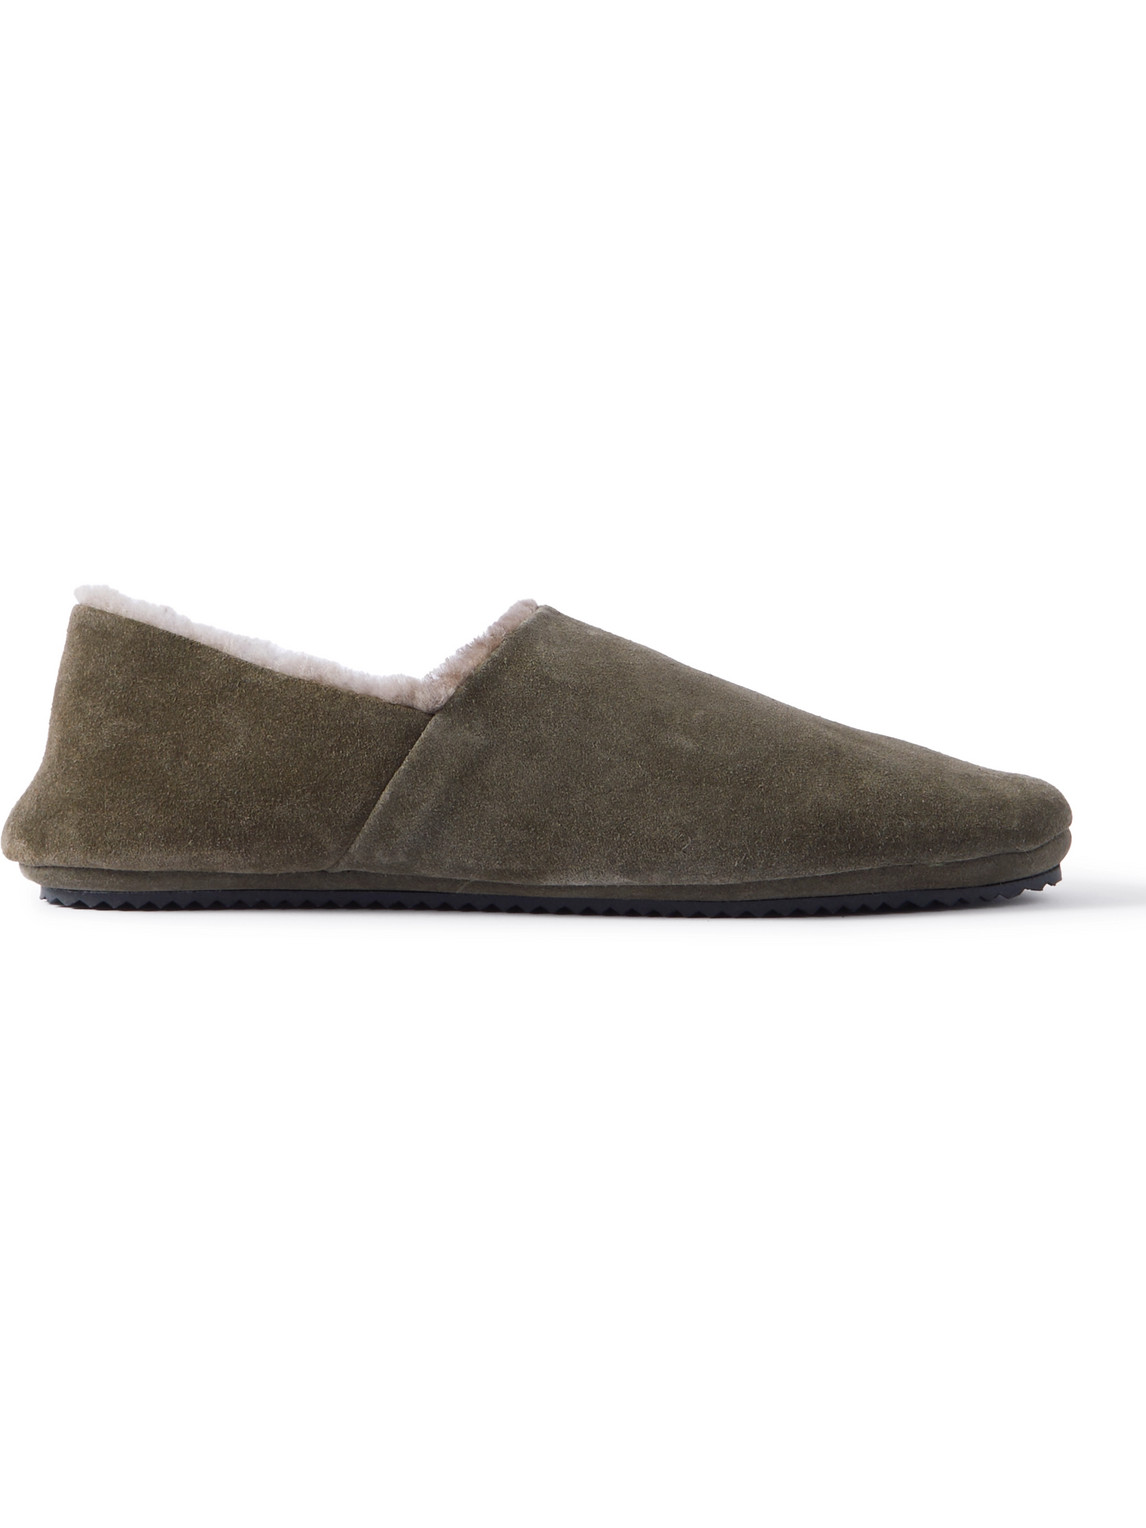 Shearling-Lined Suede Slippers